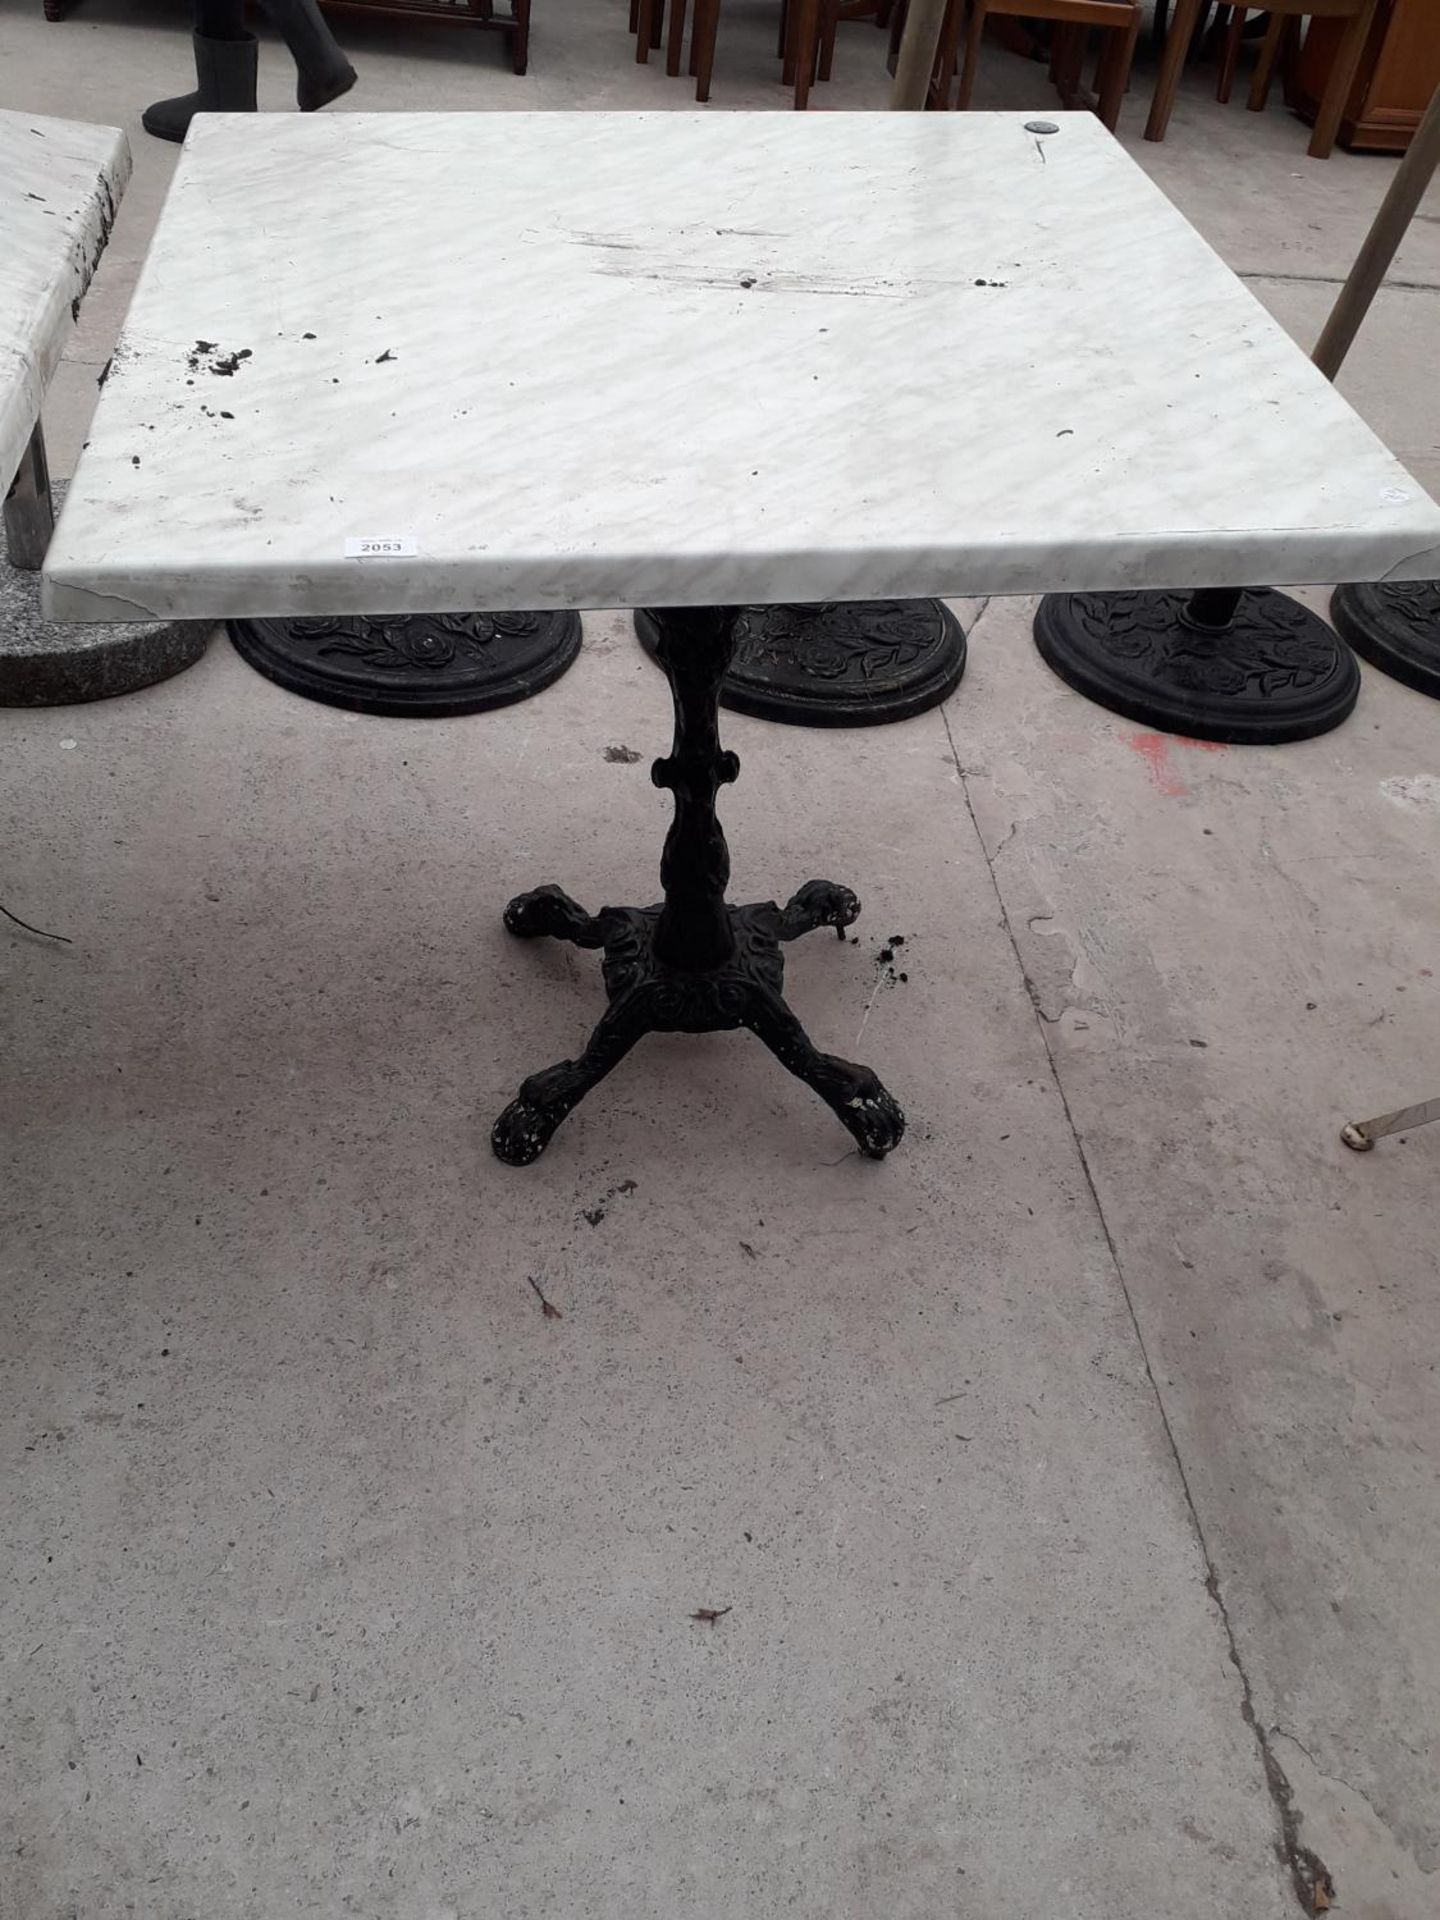 A PUB TABLE WITH WOODEN TOP AND CAST IRON TABLE BASE (79CM x 79CM)